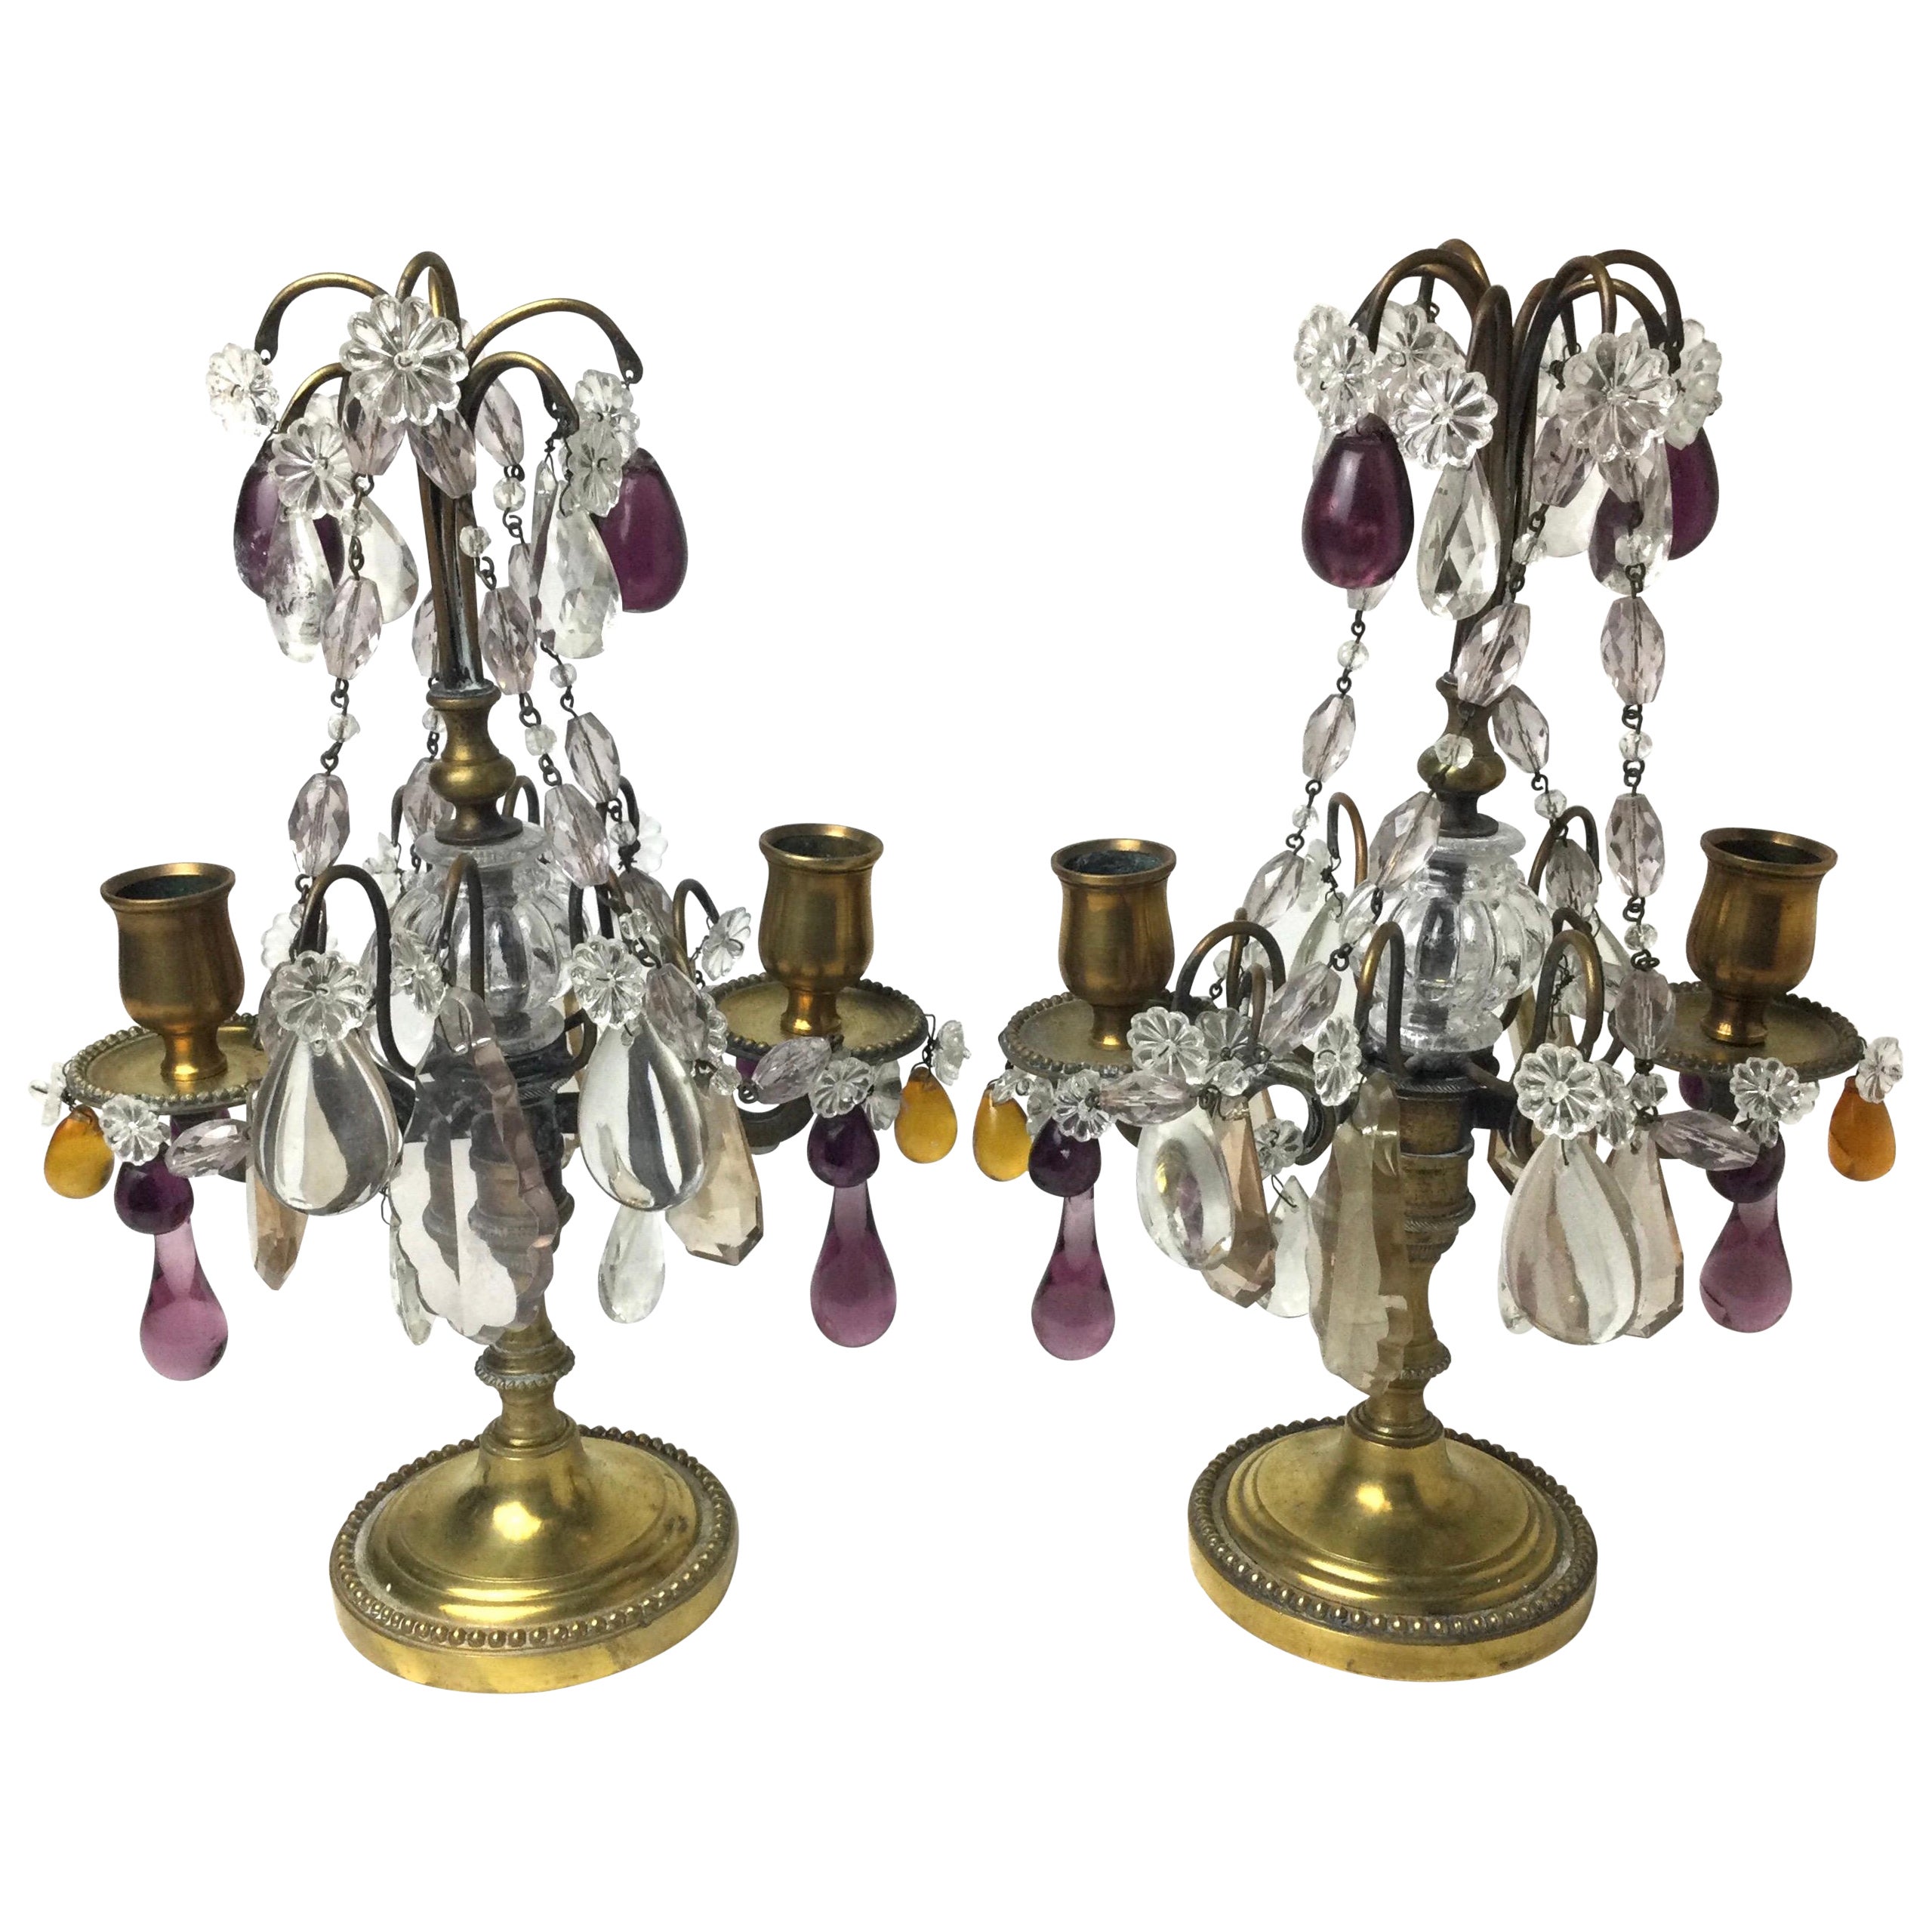 Pair of Girandoles Candelabras with Clear Amethyst and Amber Crystals For Sale